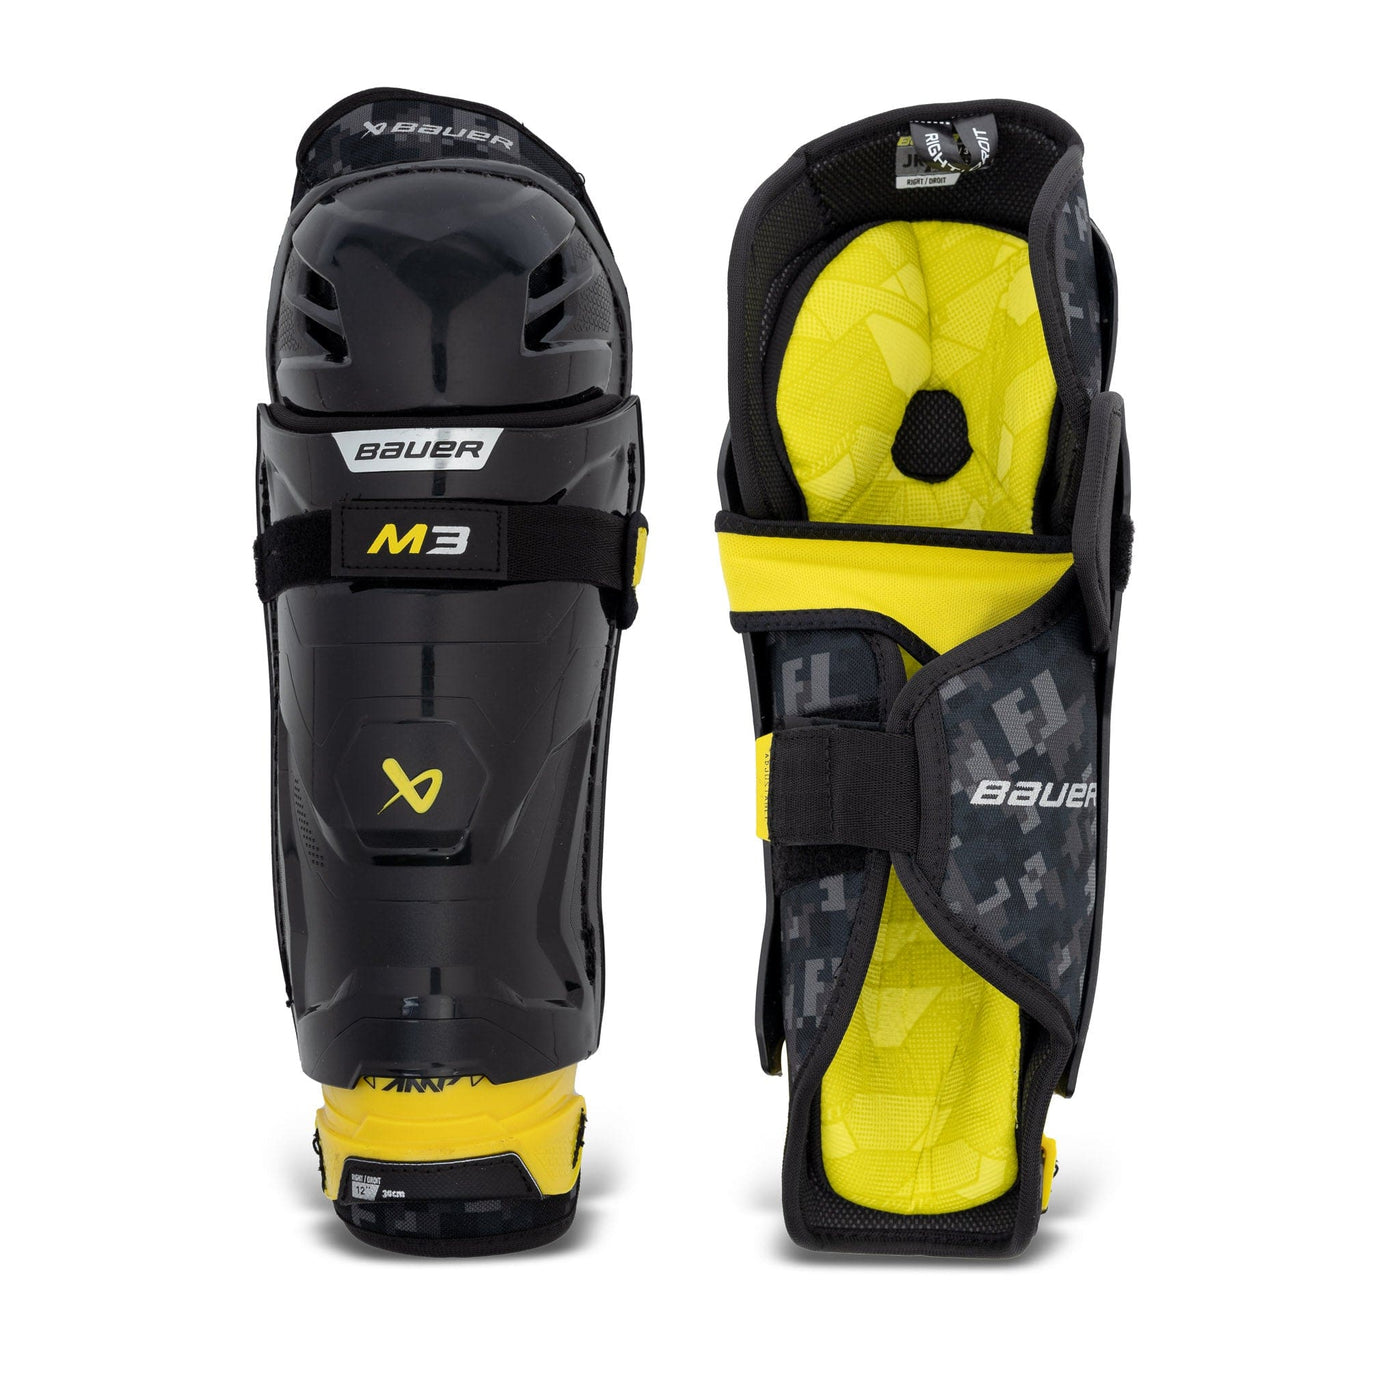 Bauer Supreme M3 Junior Hockey Shin Guards - The Hockey Shop Source For Sports